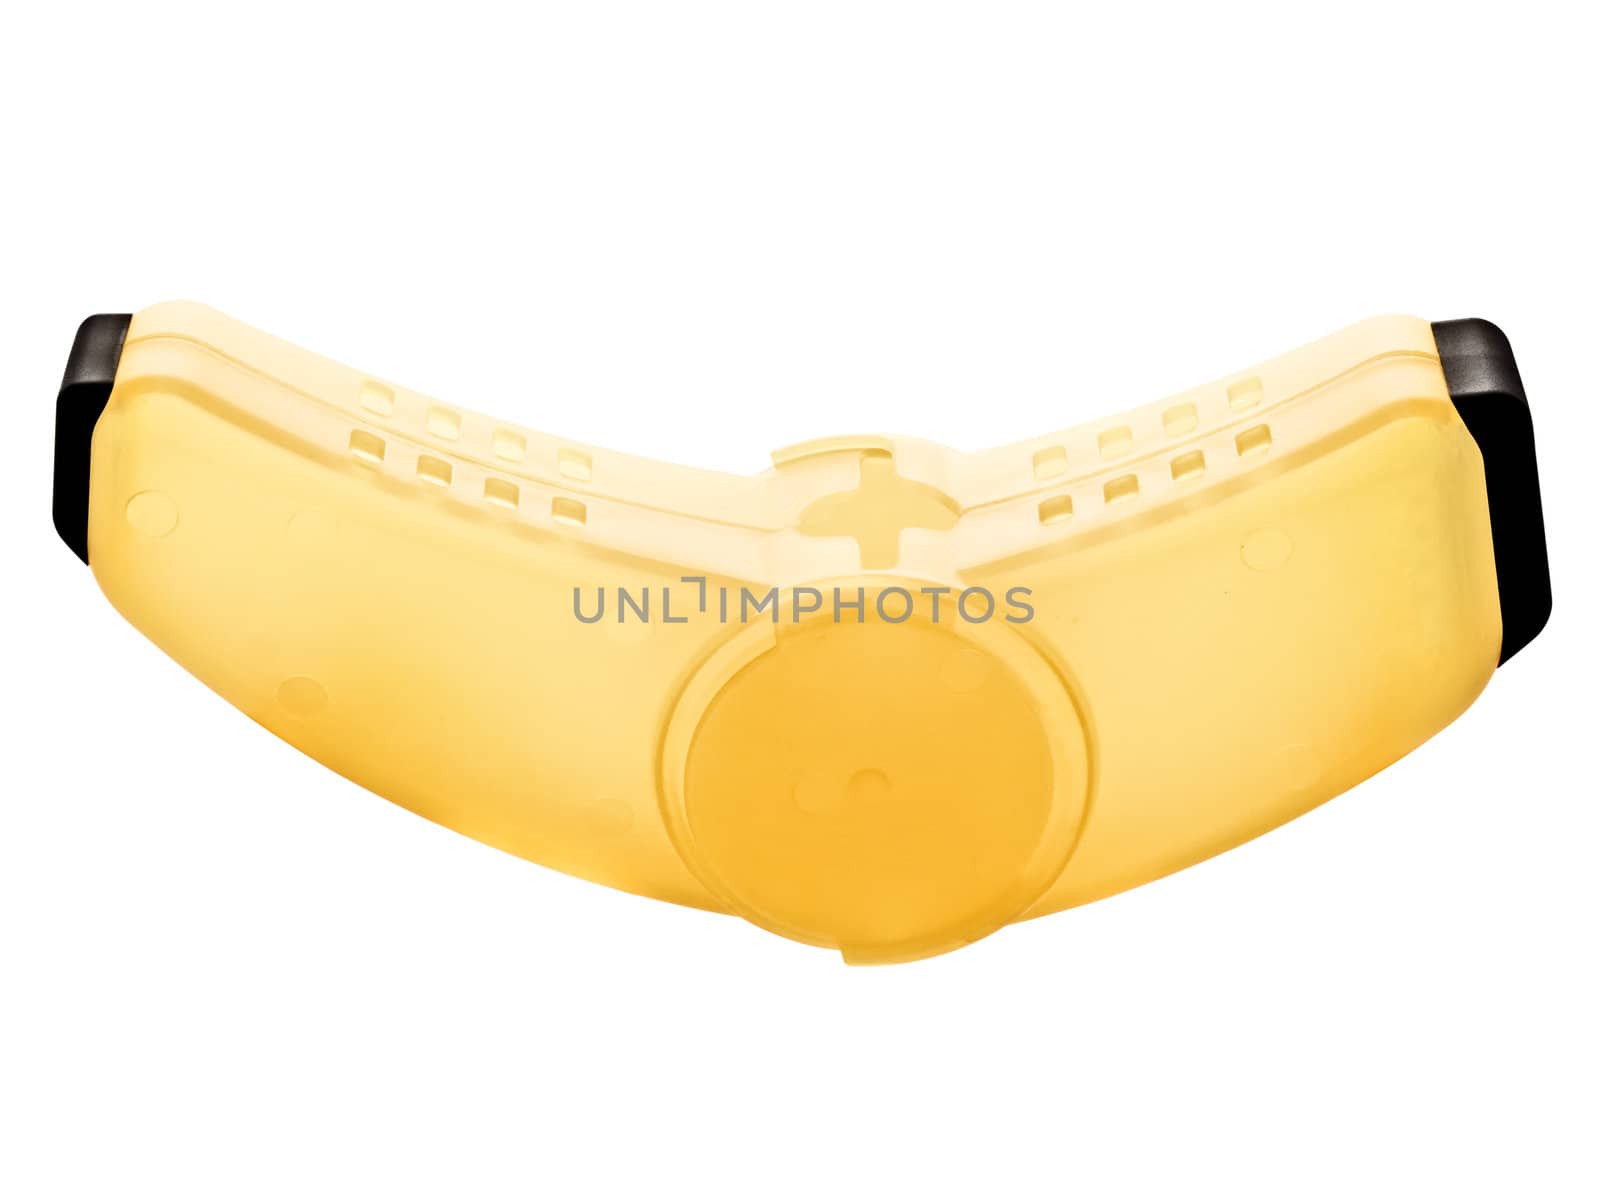 close up of a plastic banana container